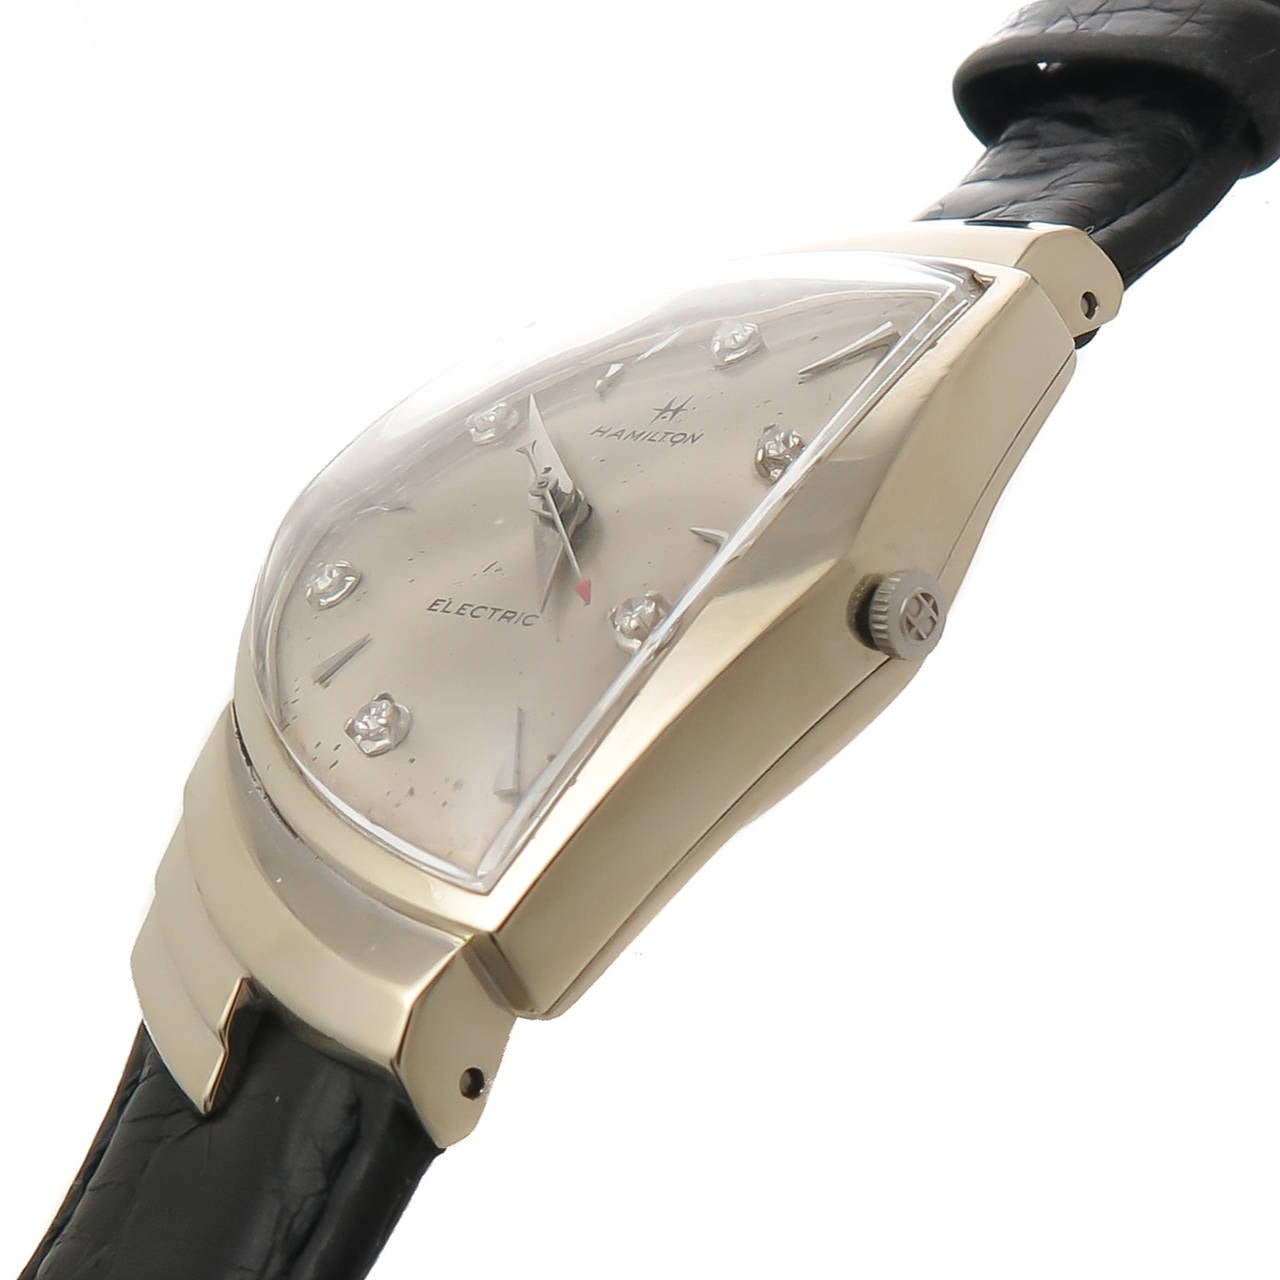 1959 hamilton electric watch solid gold